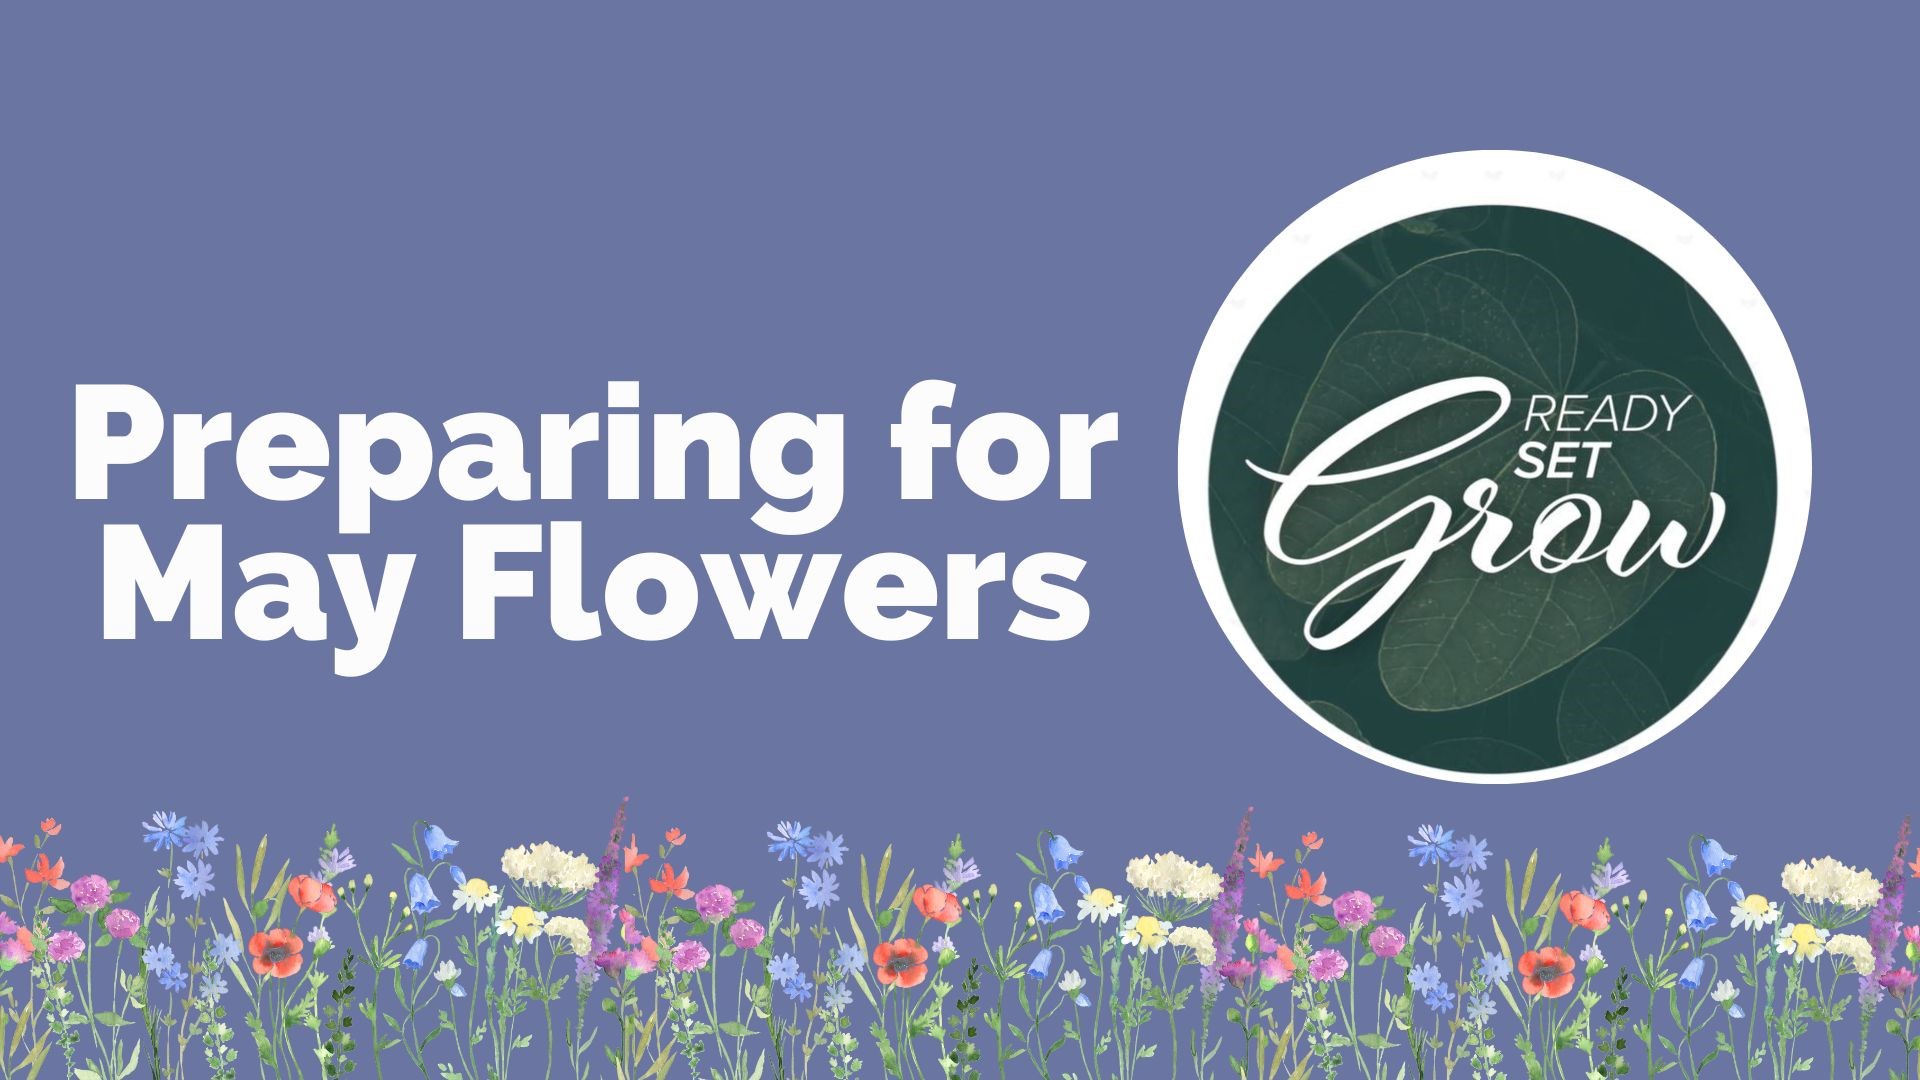 It is the end of April, which means preparing for May flowers. How to get the most out of your garden, and create sustainable and even edible landscapes.